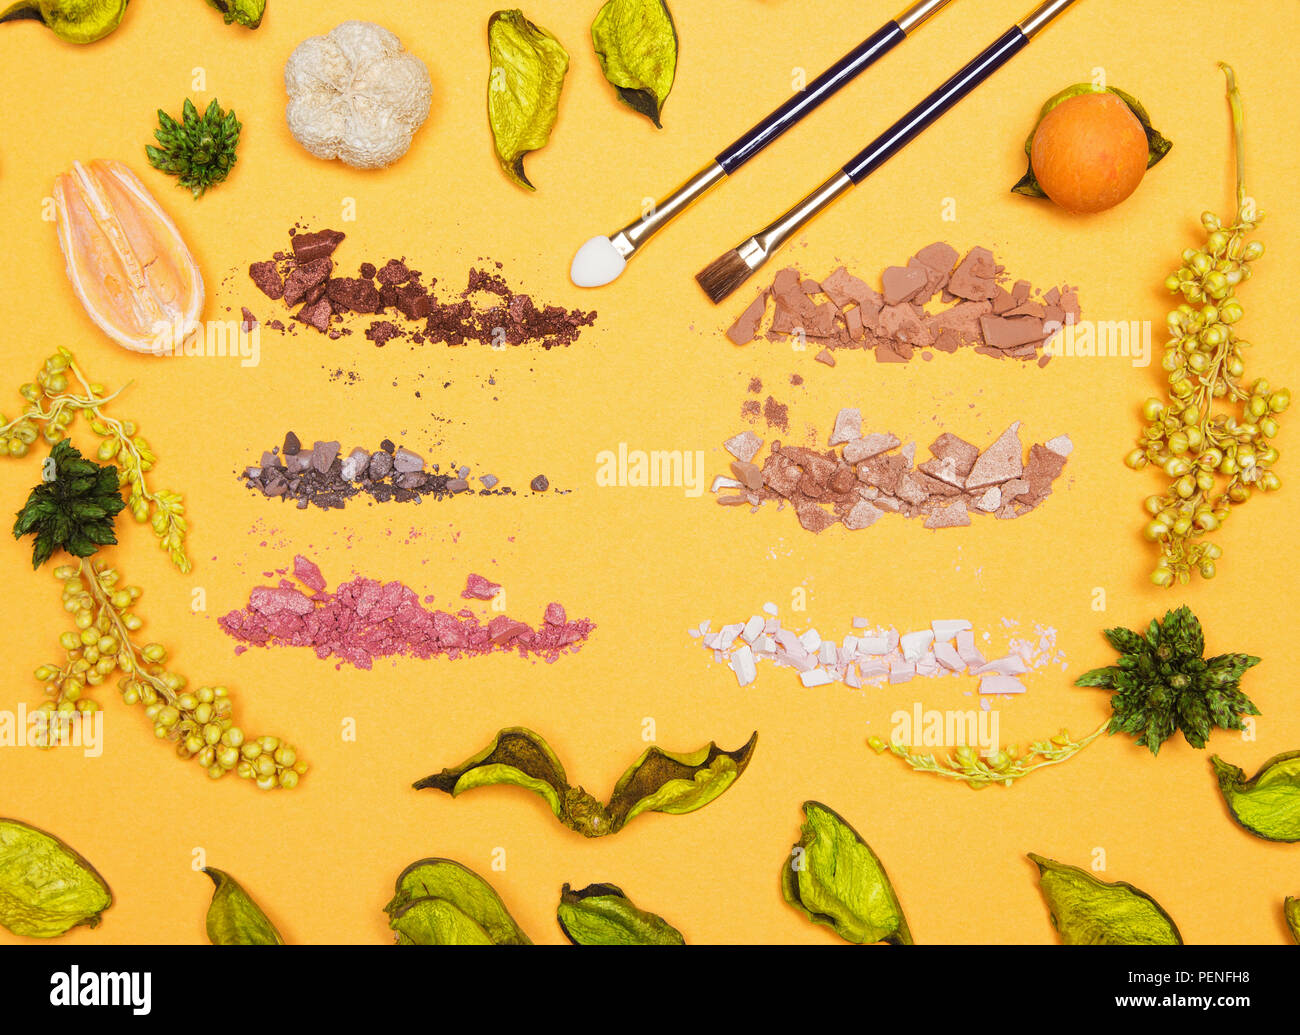 Autumn makeup concept: varicolored crushed compact eyeshadow with makeup brush and applicator in frame of variety of dried plants on yellow background Stock Photo